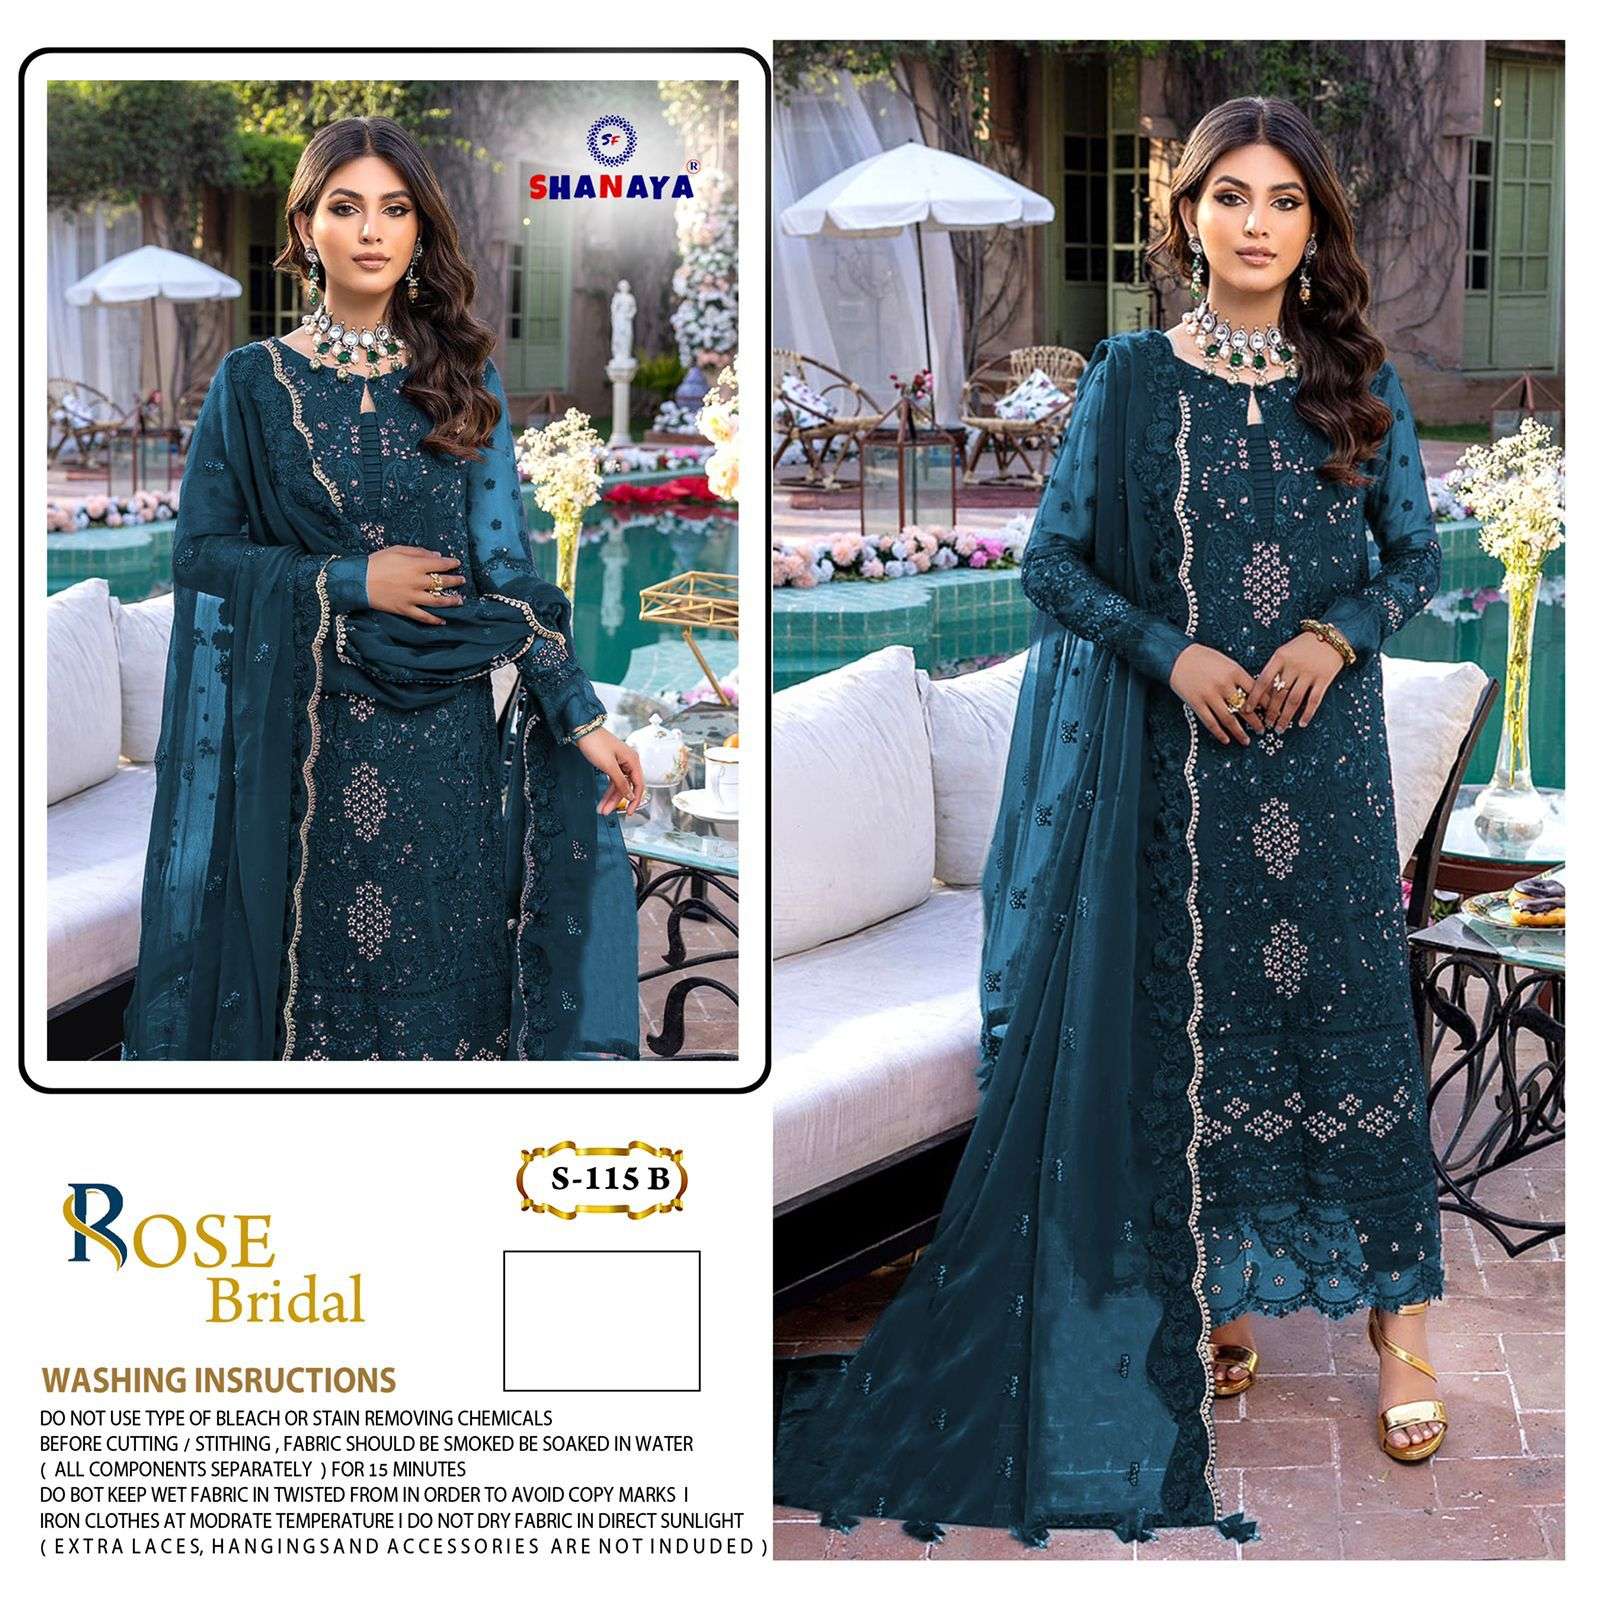 SHANAYA ROSE BRIDAL S 115 EDITION DESIGNER FOX GEORGETTE WITH HEAVY EMBROIDERY WORK PAKISTANI REPLICA SUITS WHOLESALE RATE